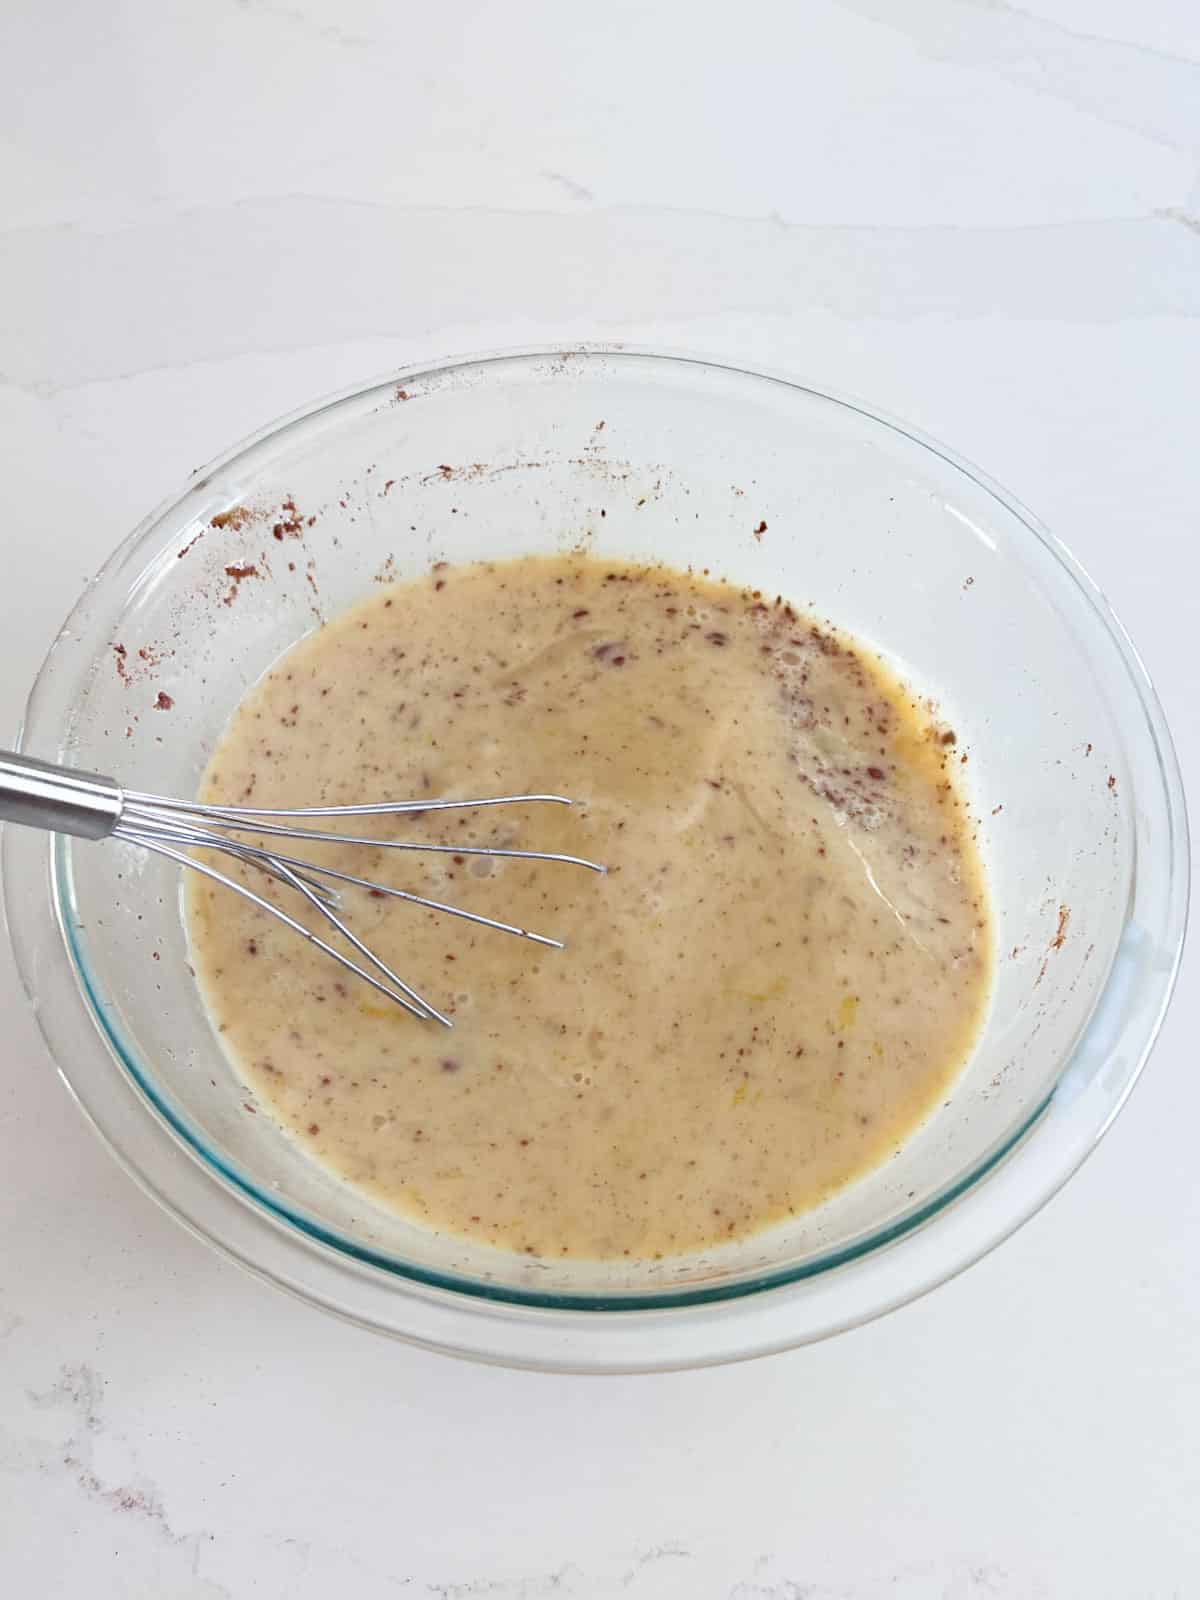 Custard ingredients mixed together.